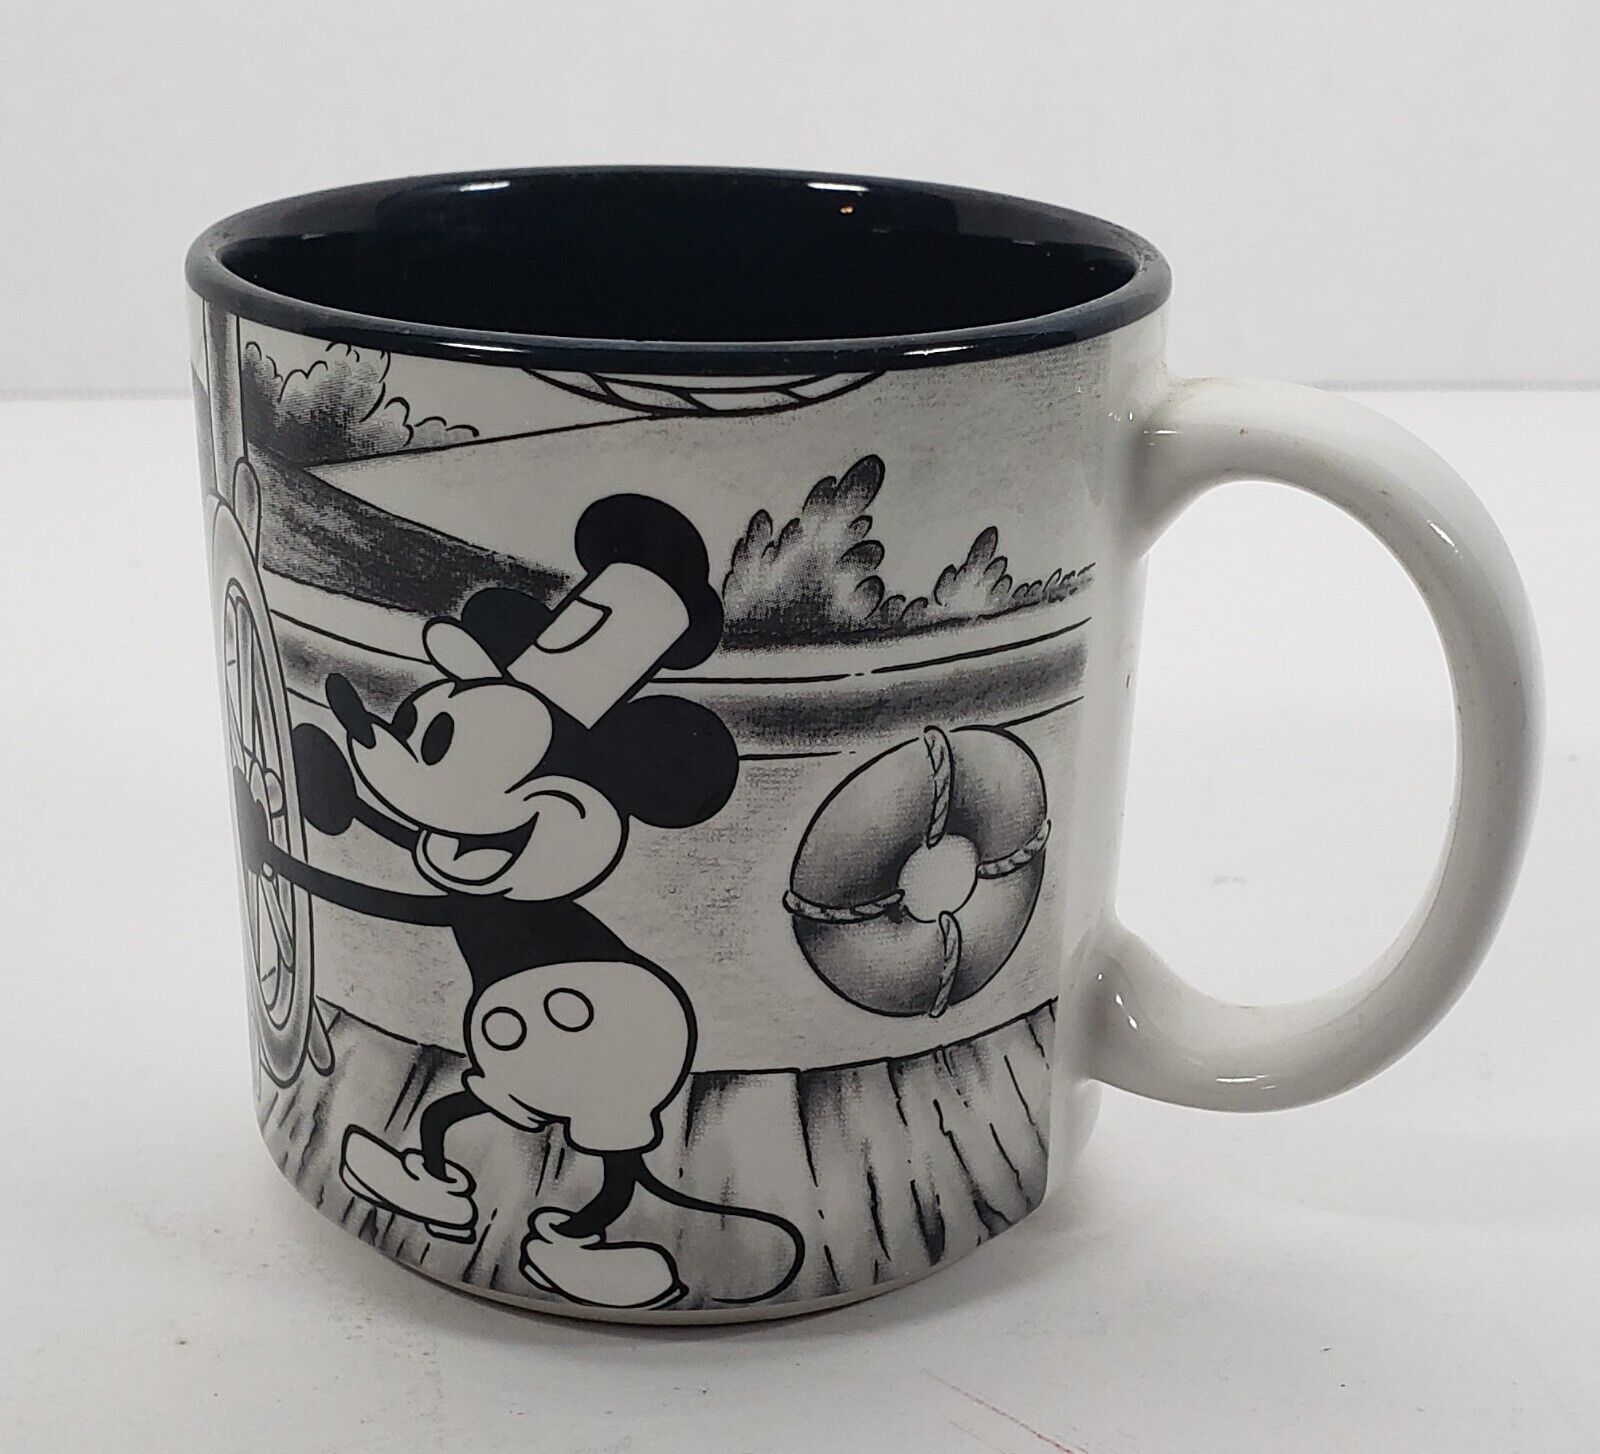 1980/90s Vintage Disney Steamboat Willie Mickey Mouse mug